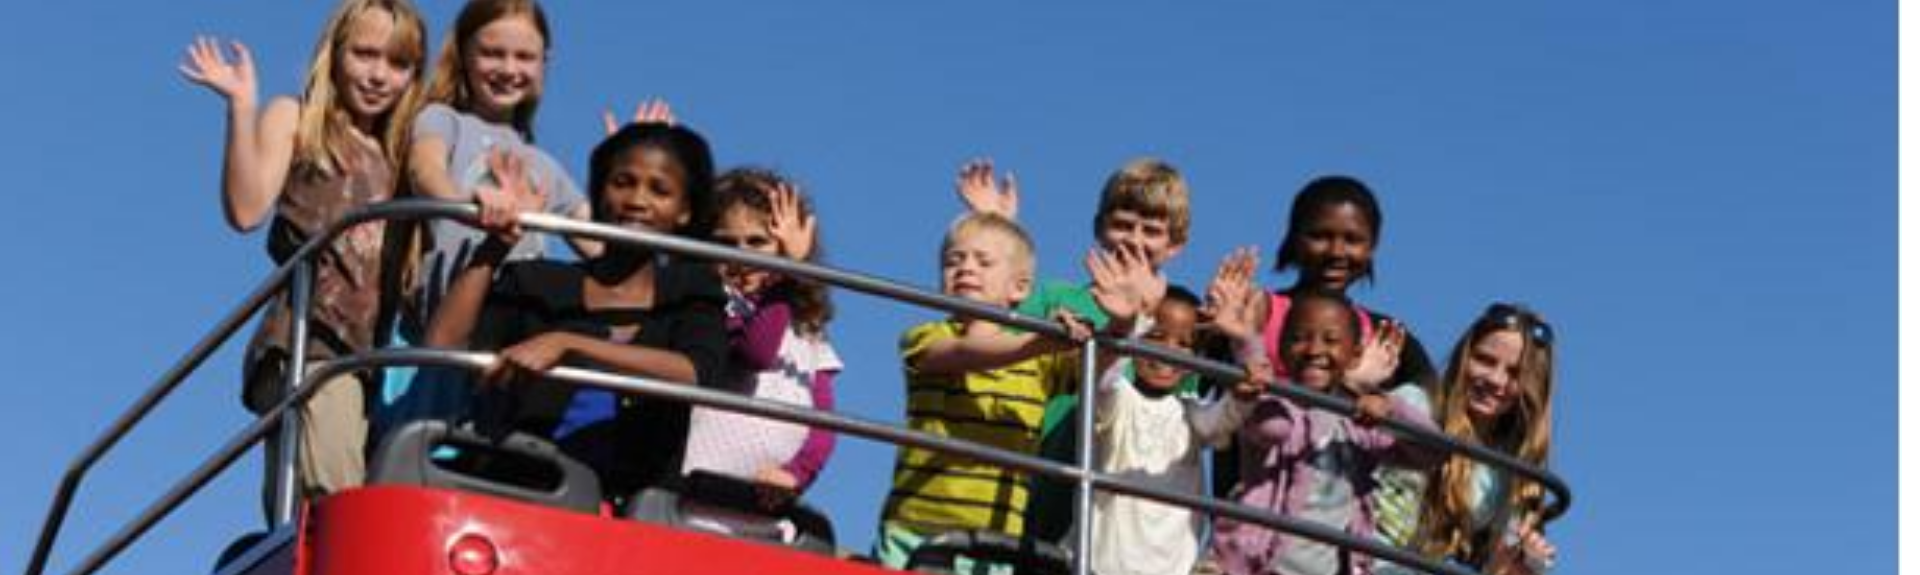 City Sightseeing South Africa | Cape Town | Things to do With Kids